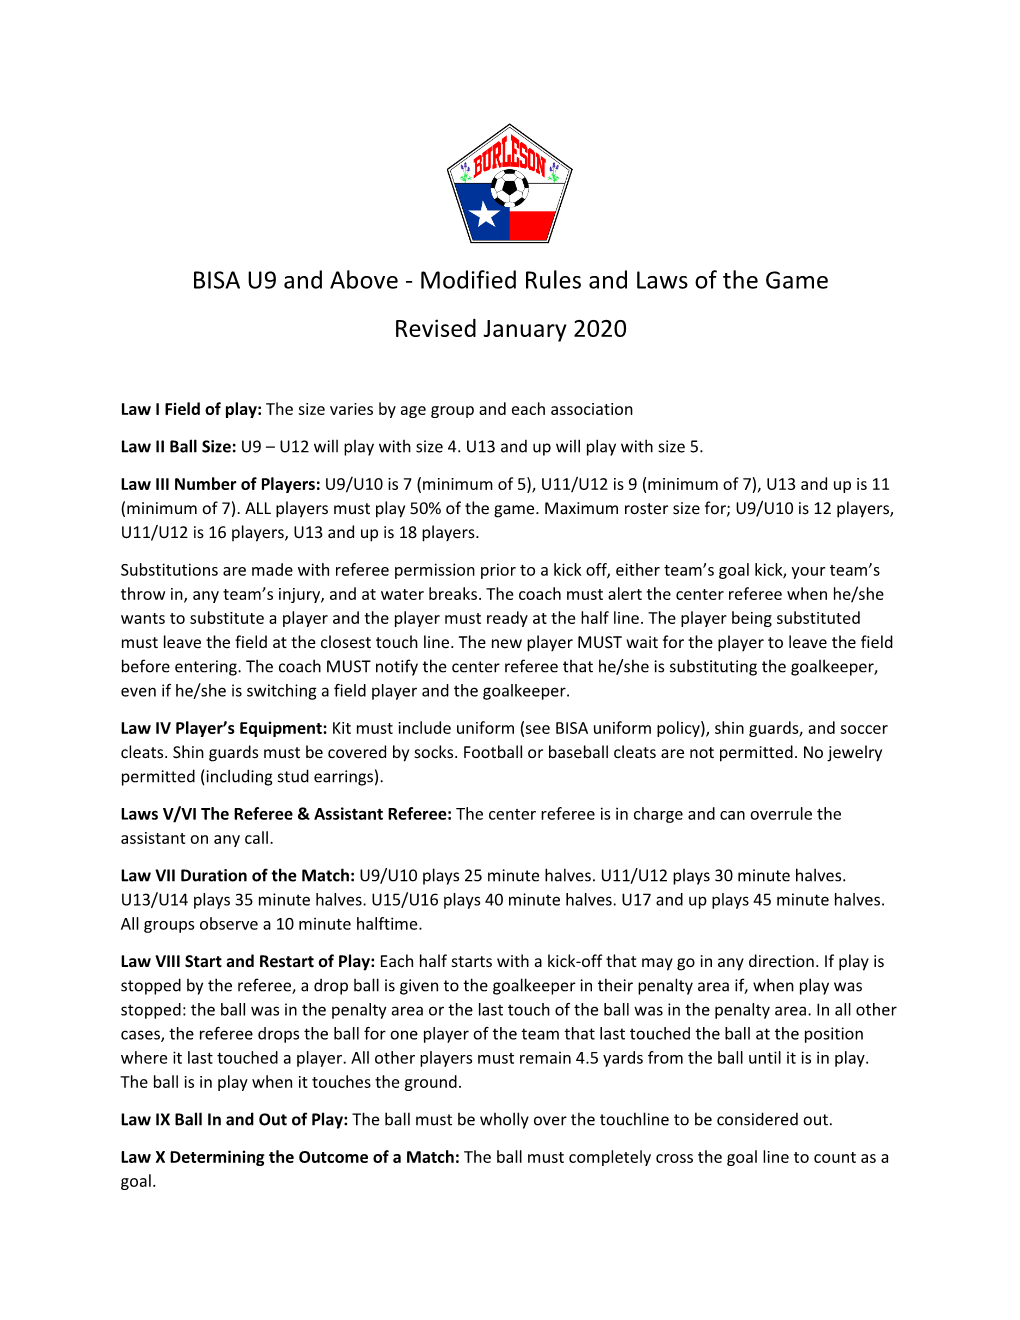 BISA U9 and Above - Modified Rules and Laws of the Game Revised January 2020